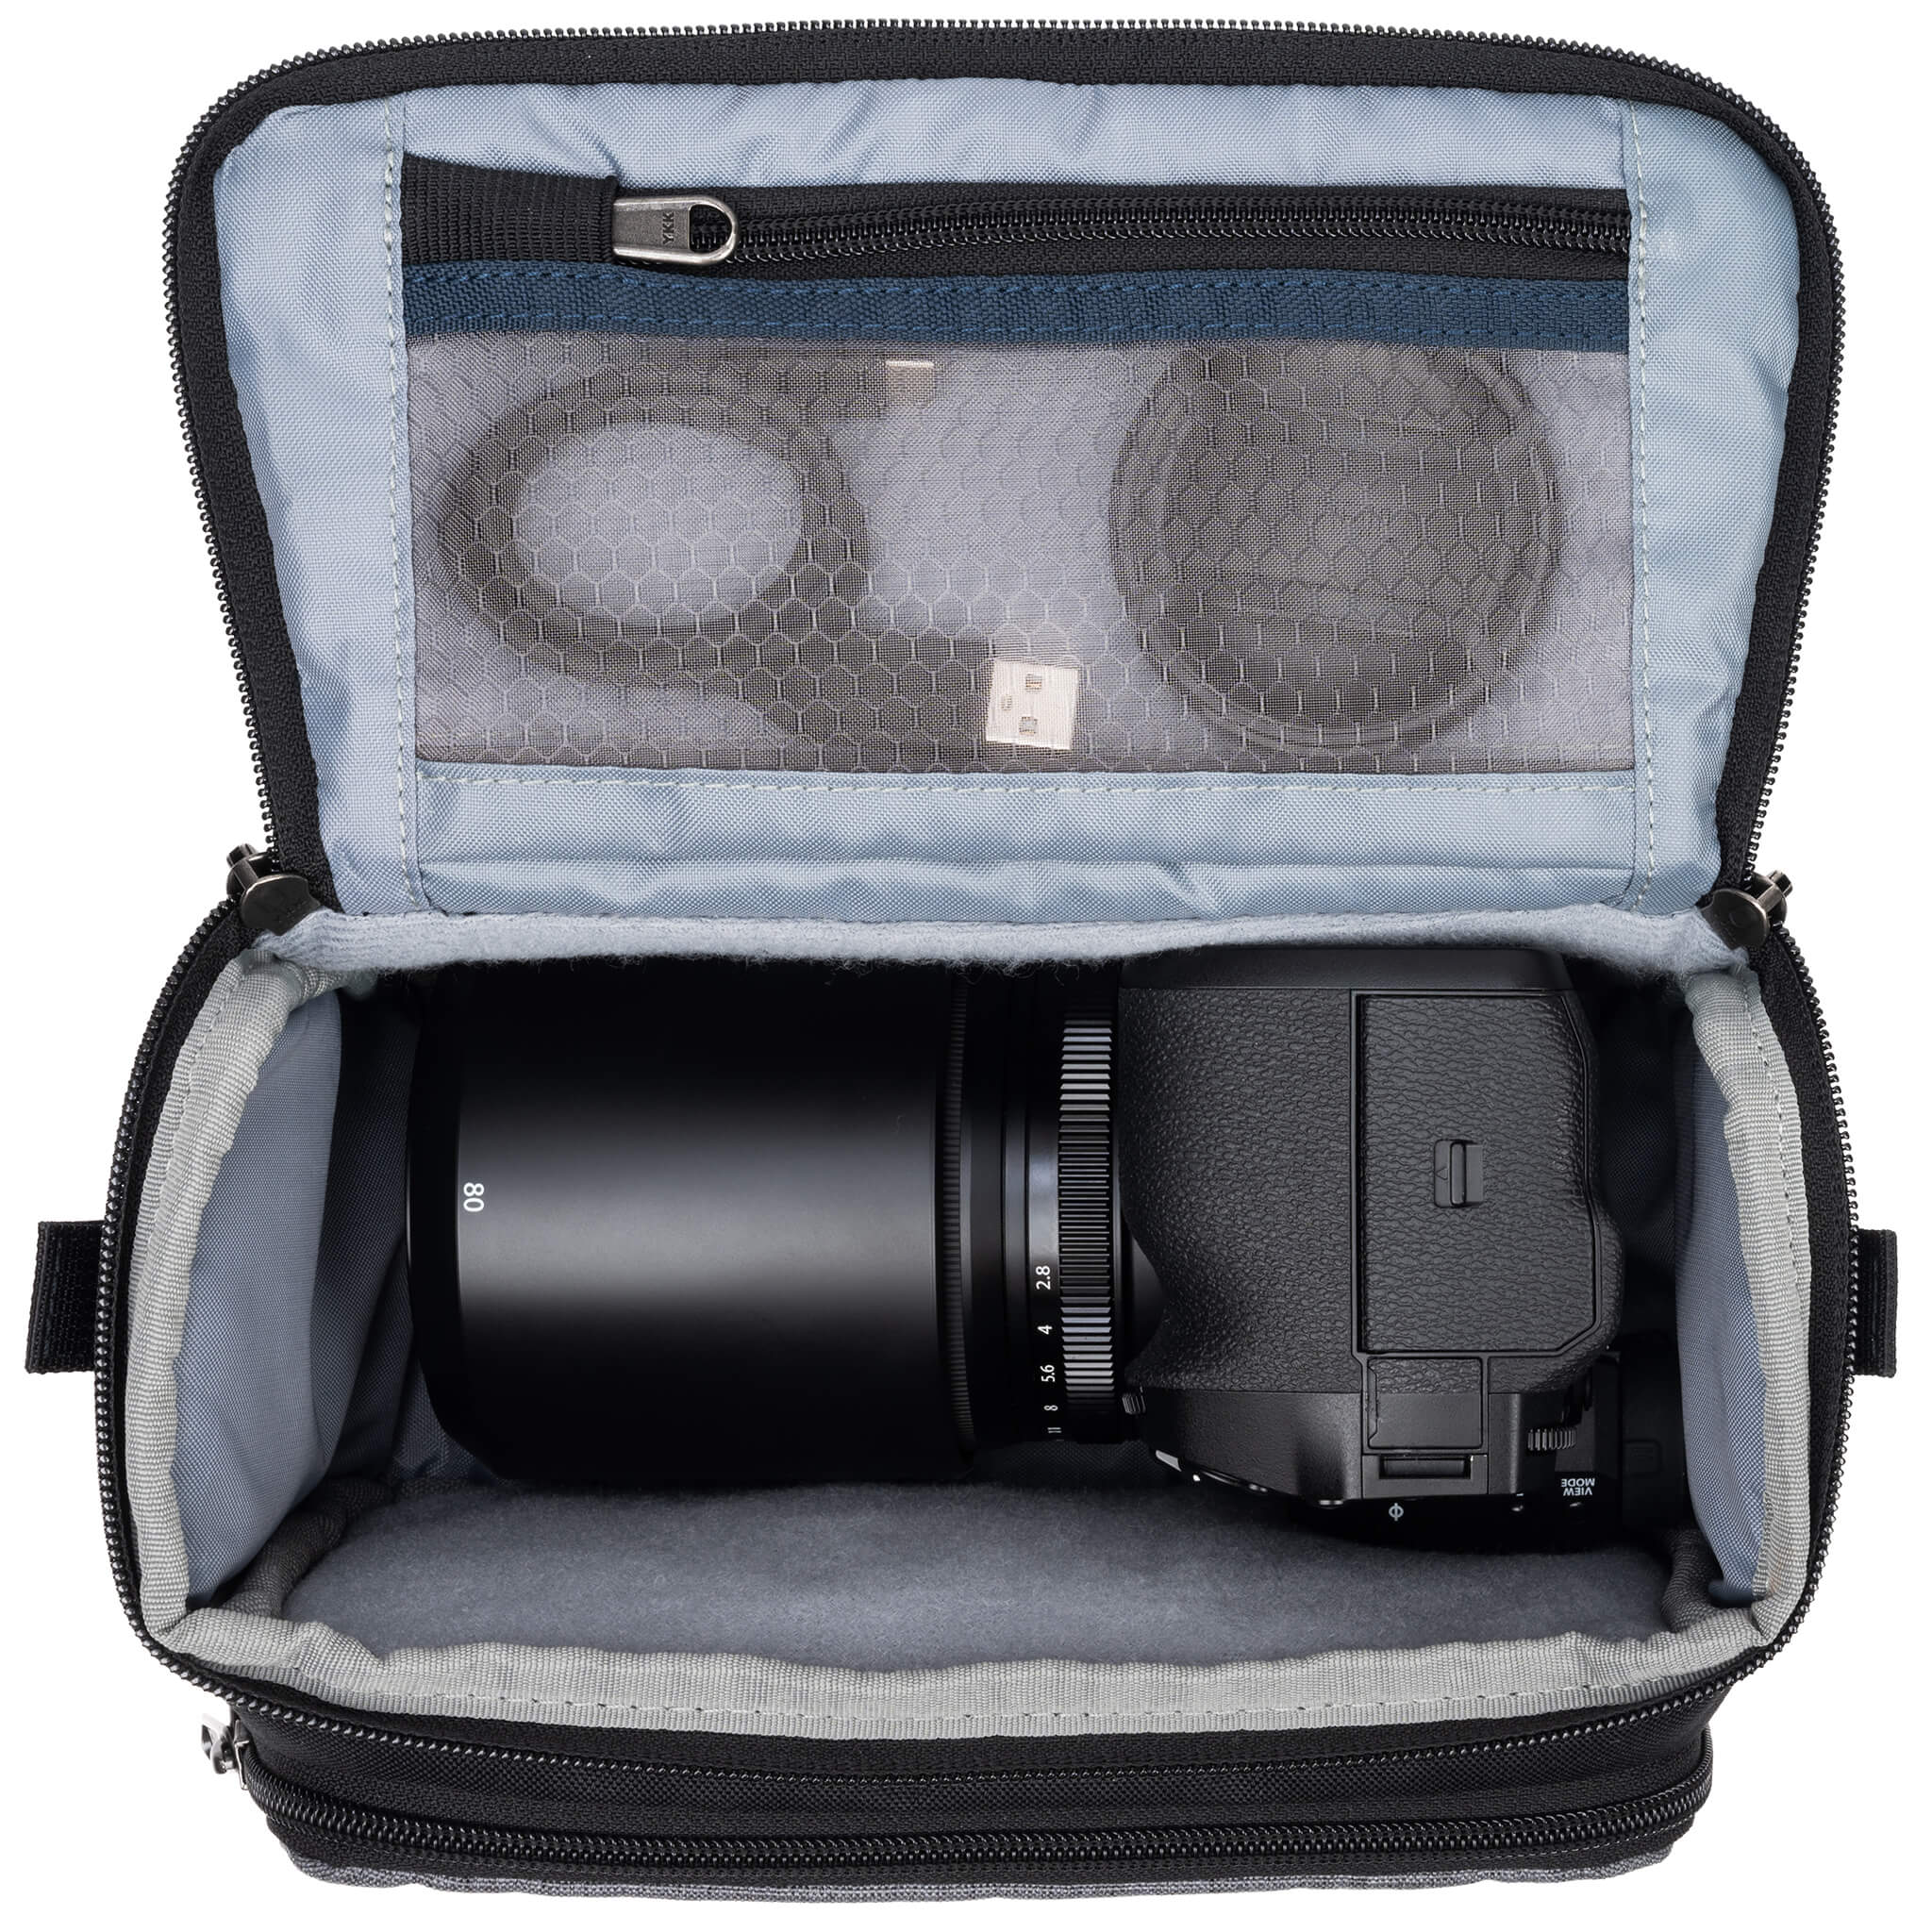 Fits one standard mirrorless body plus 1 to 2 lenses: short to medium f/4 zooms or short to medium primes.